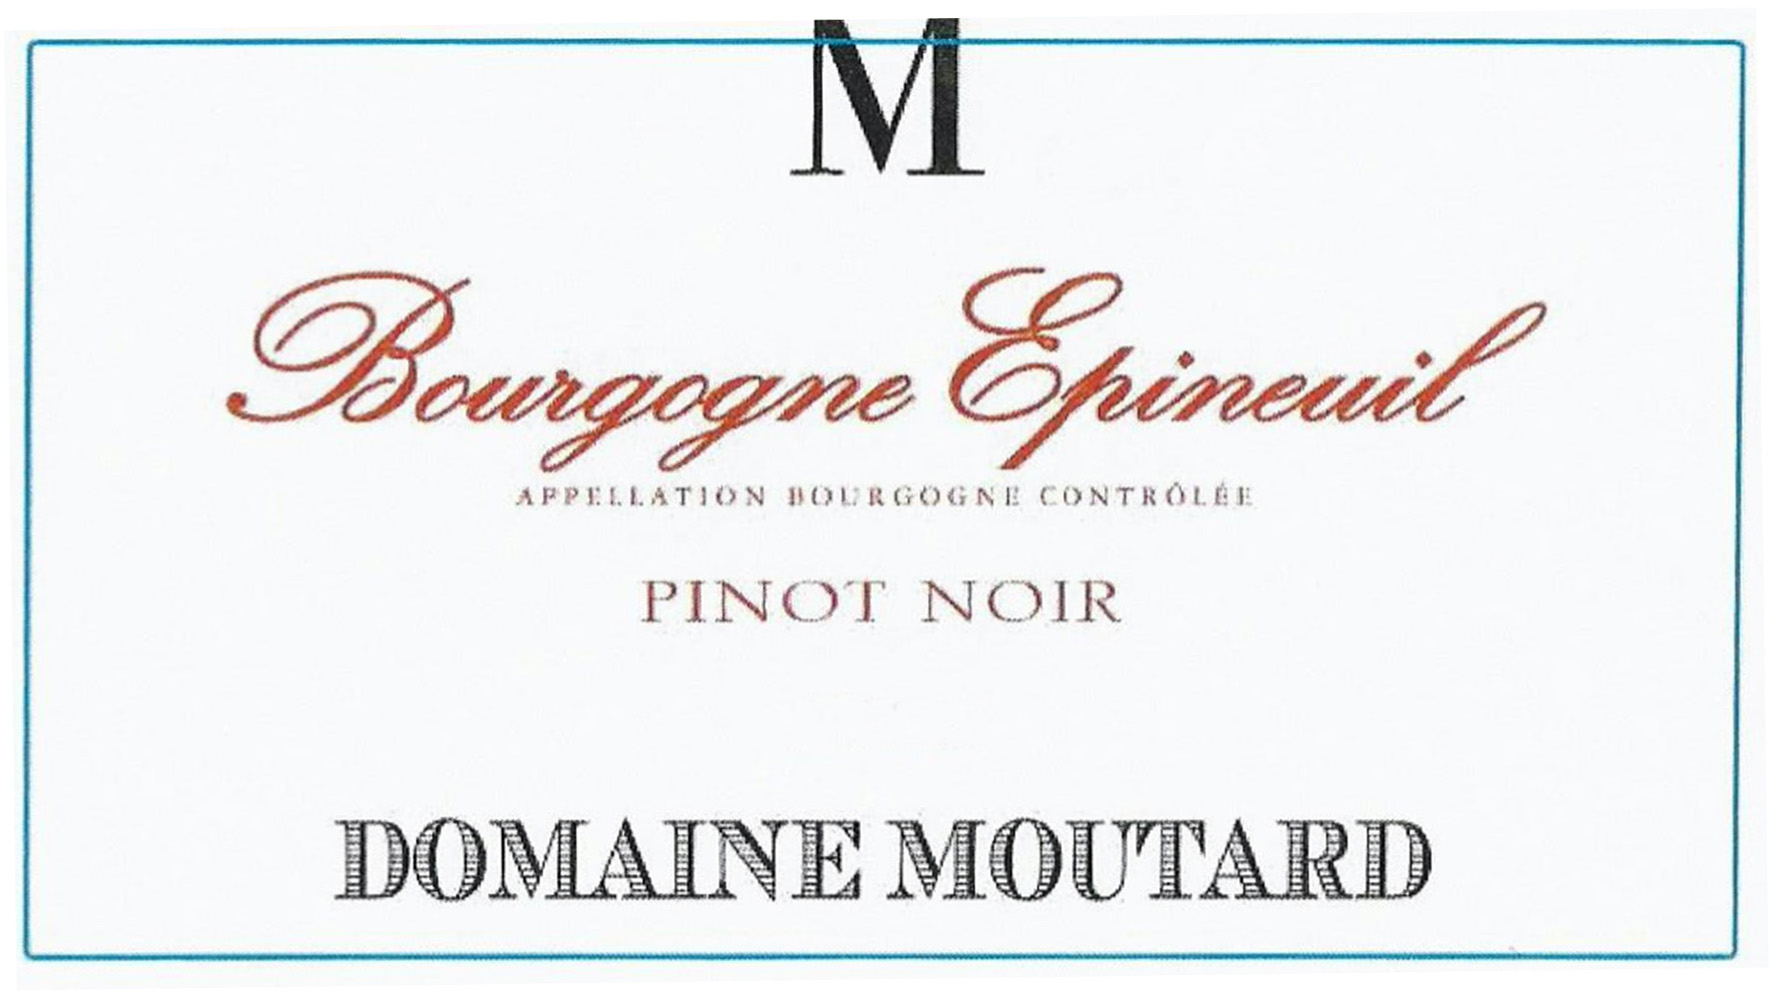 Domaine Moutard - Pinot Noir - Bourgogne Epineuil label